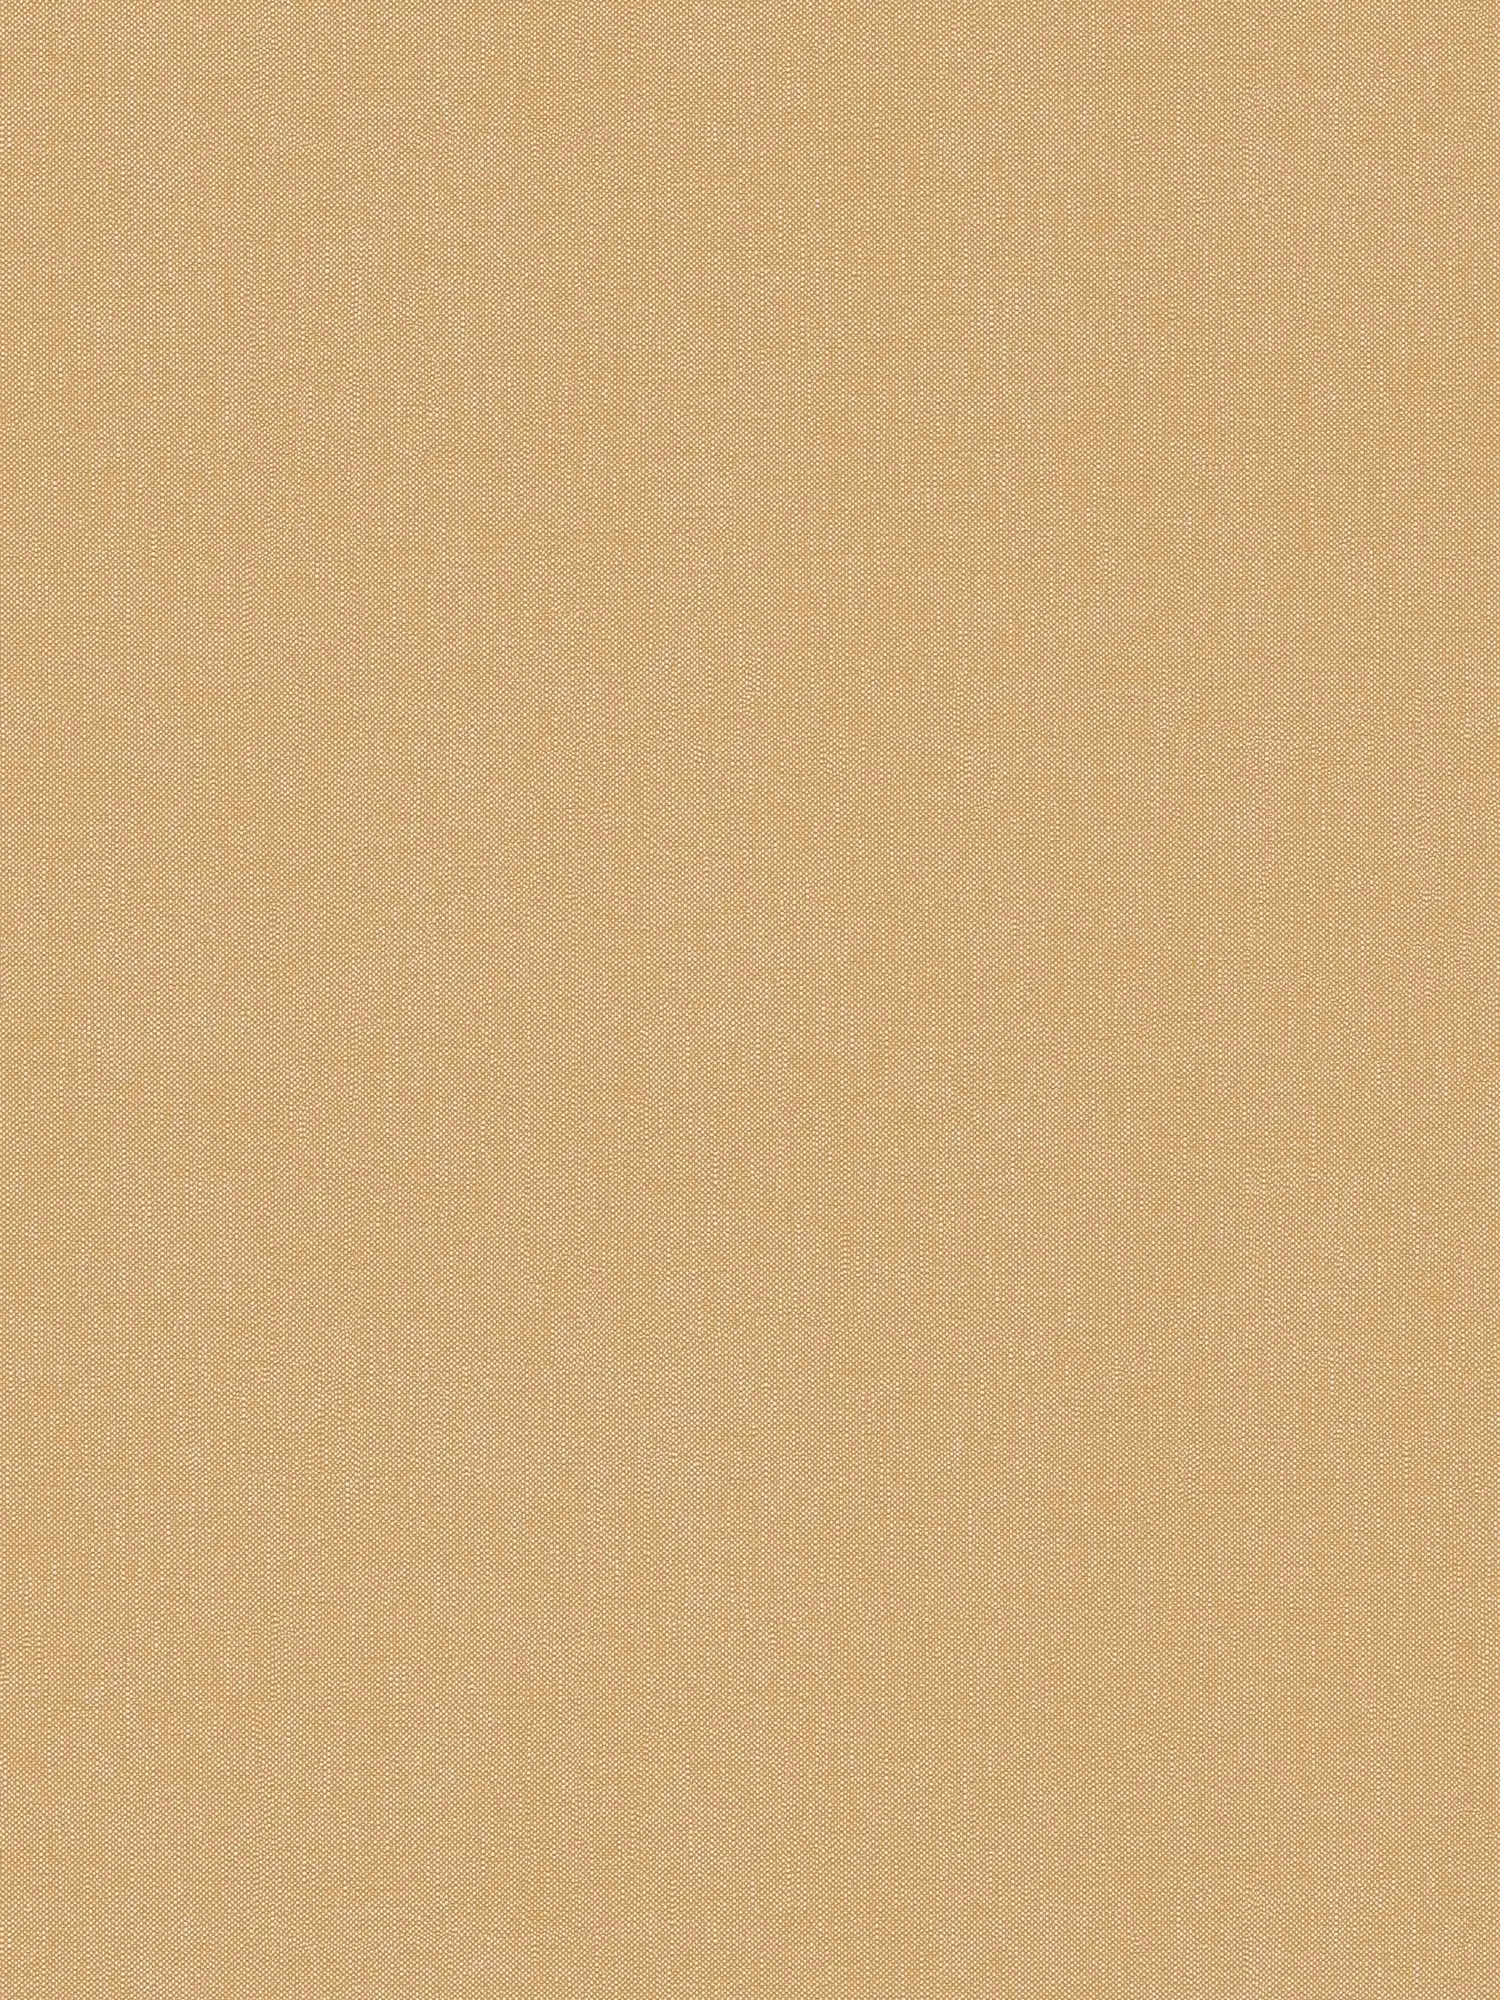 Plain wallpaper with fine structure - brown, yellow
